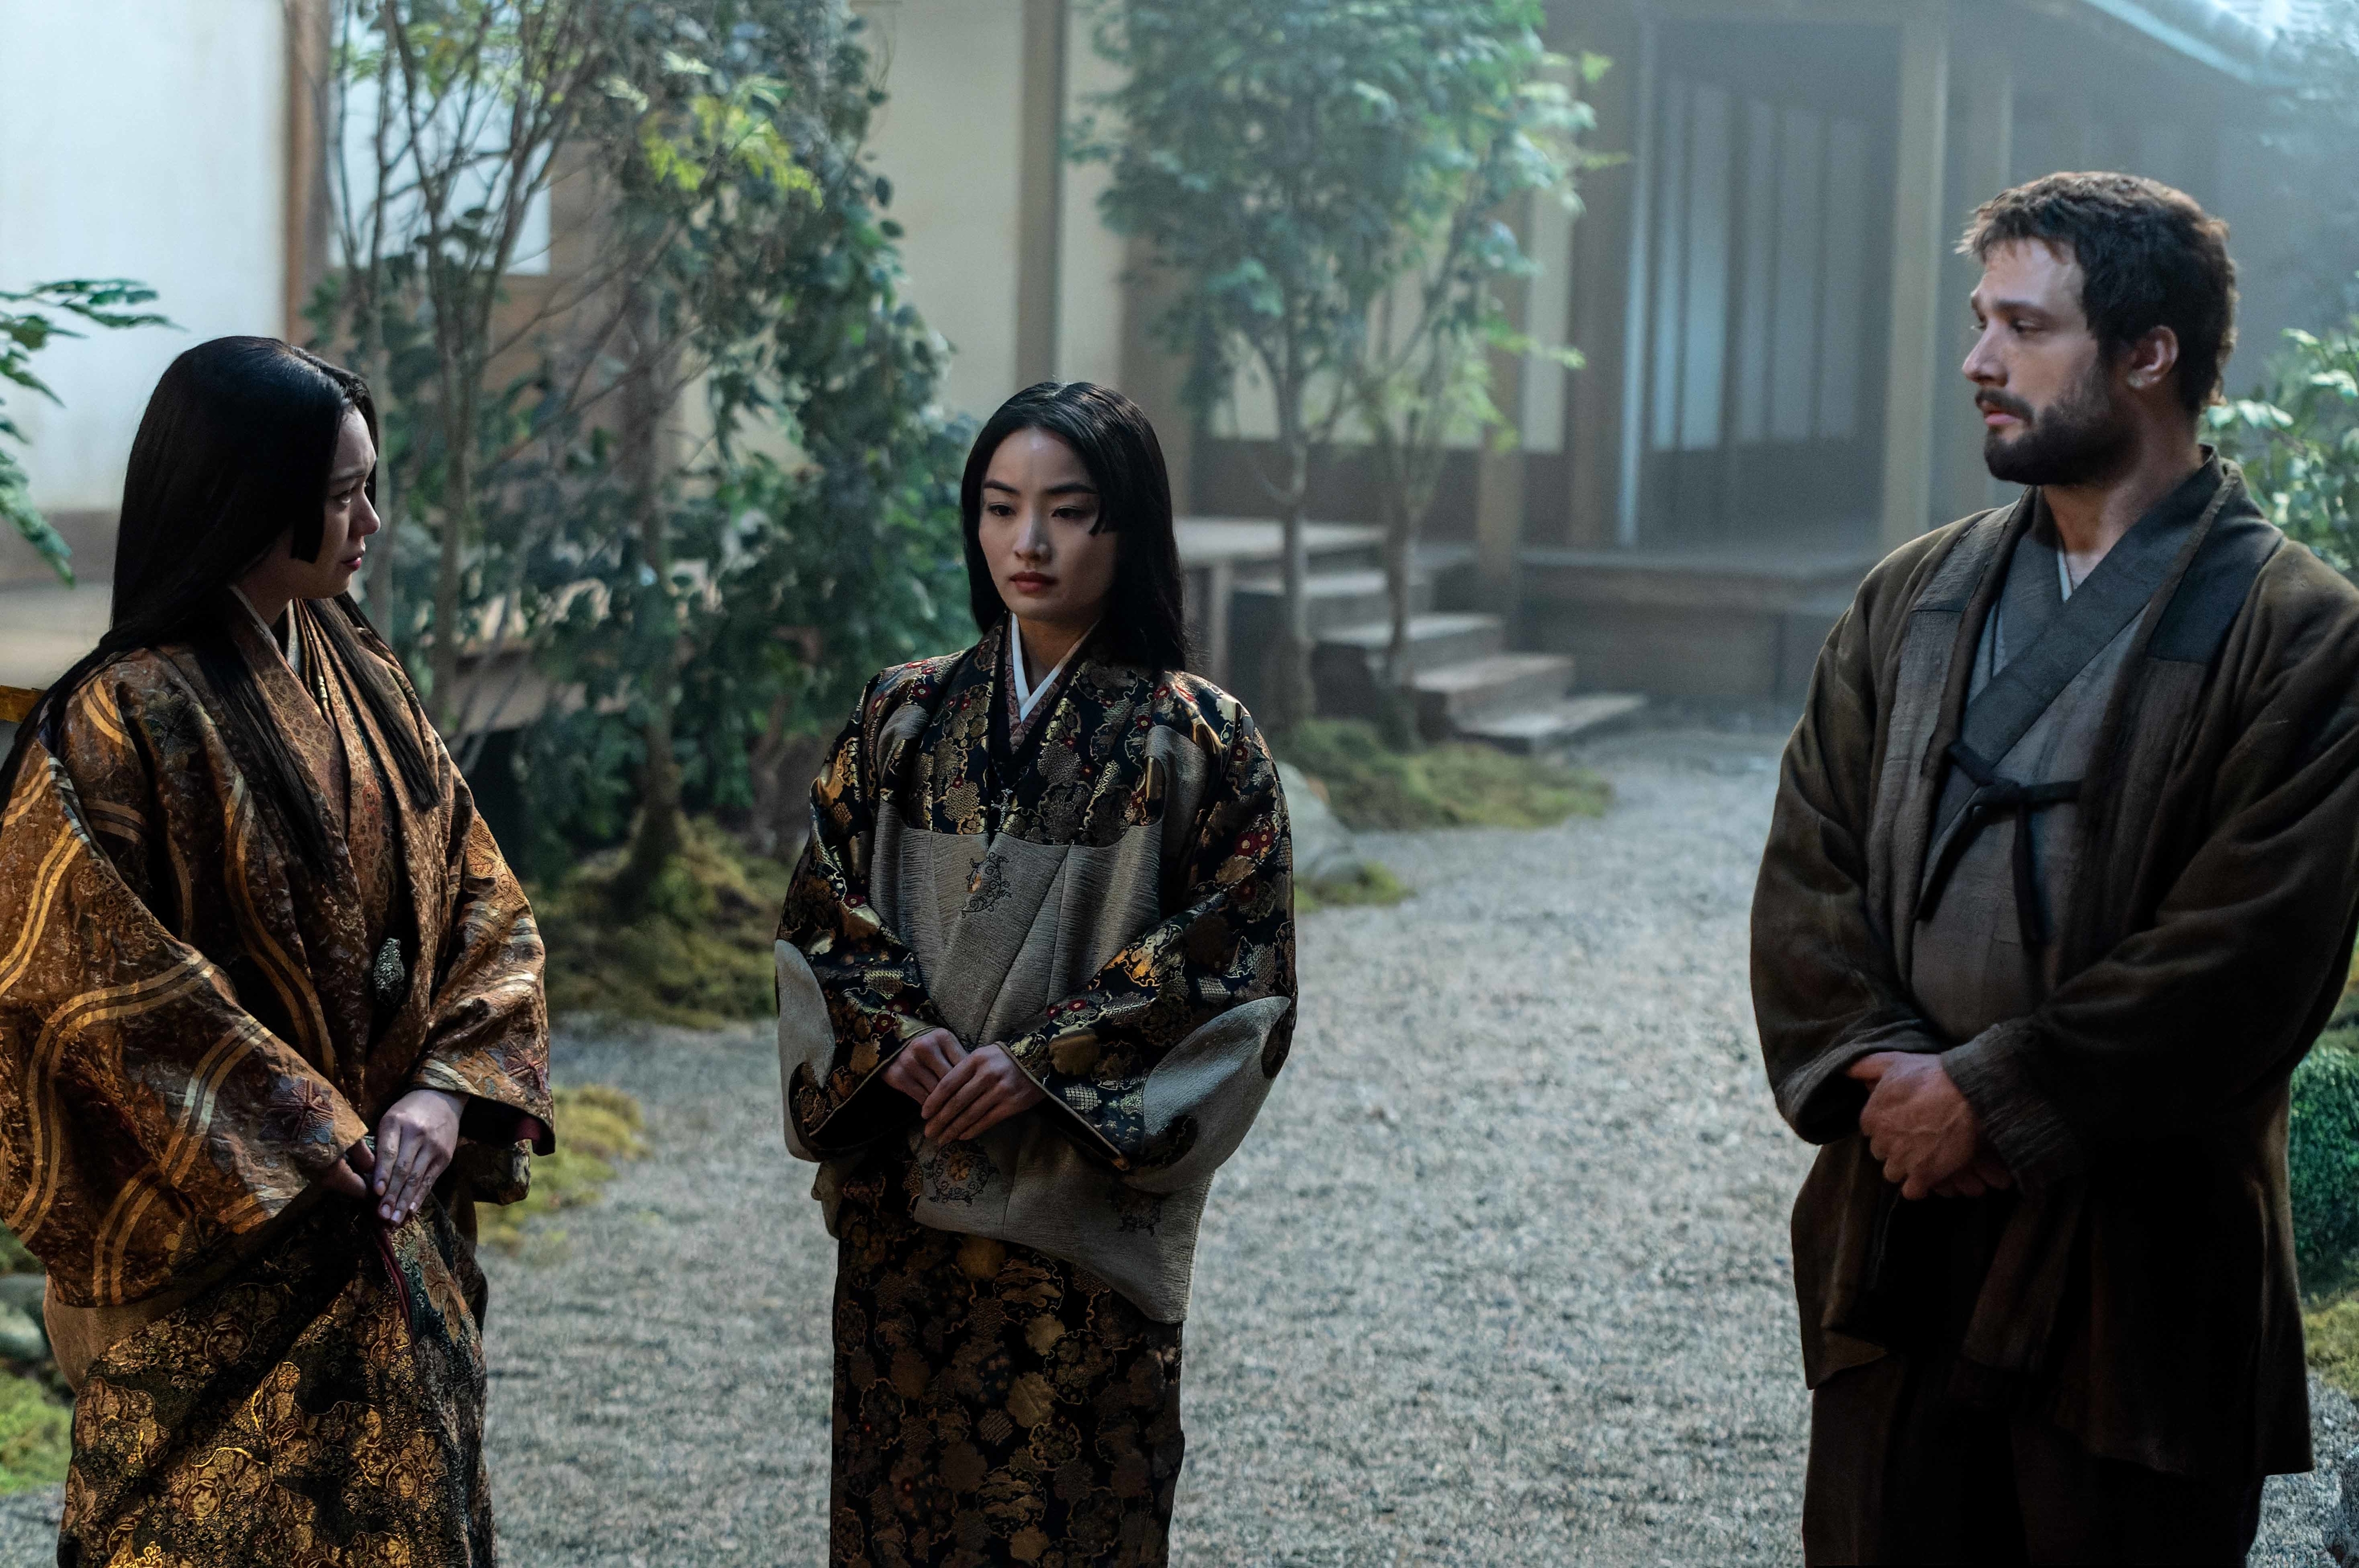 Three actors standing in a traditional Japanese setting, wearing kimonos; two women and one man